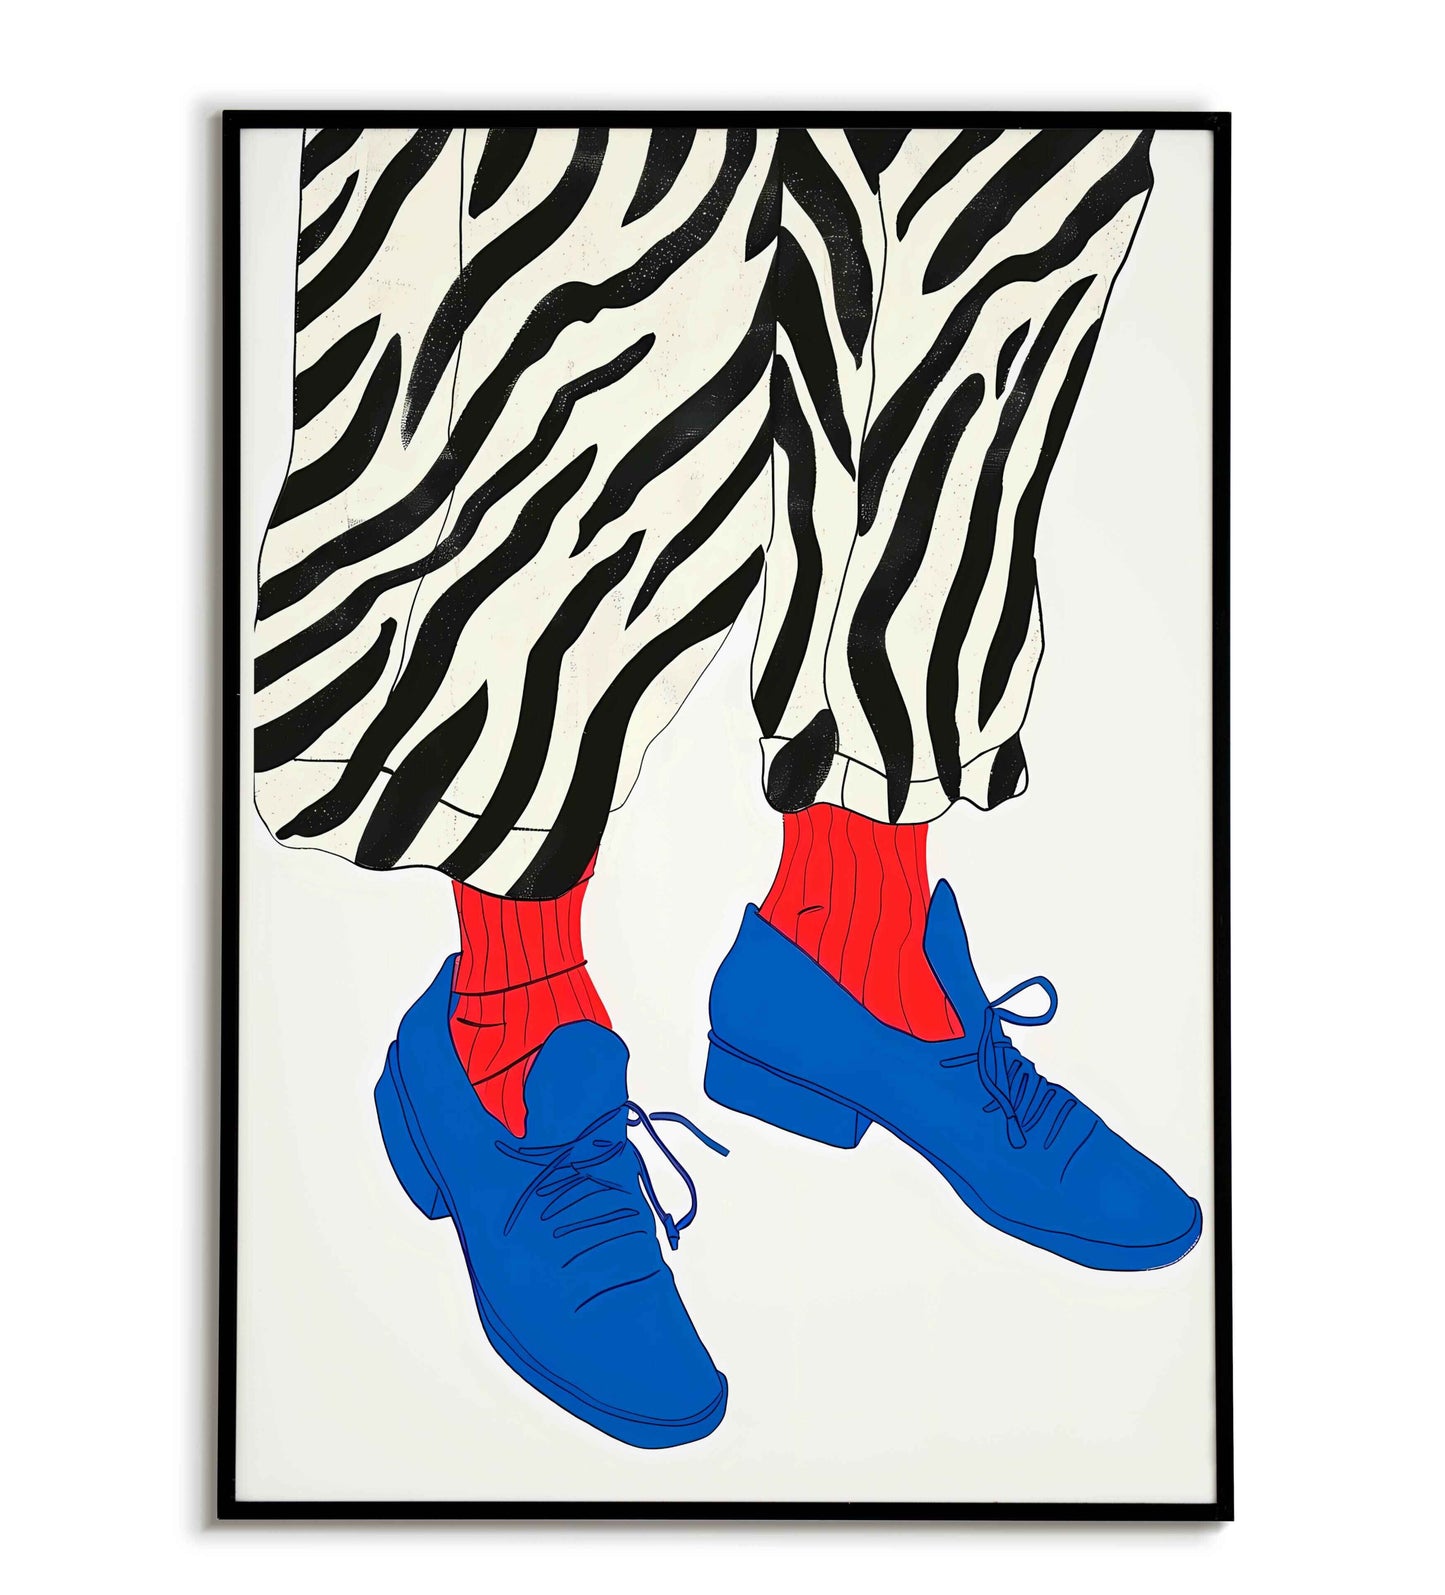 Matisse Trouser printable poster. Available for purchase as a physical poster or digital download.